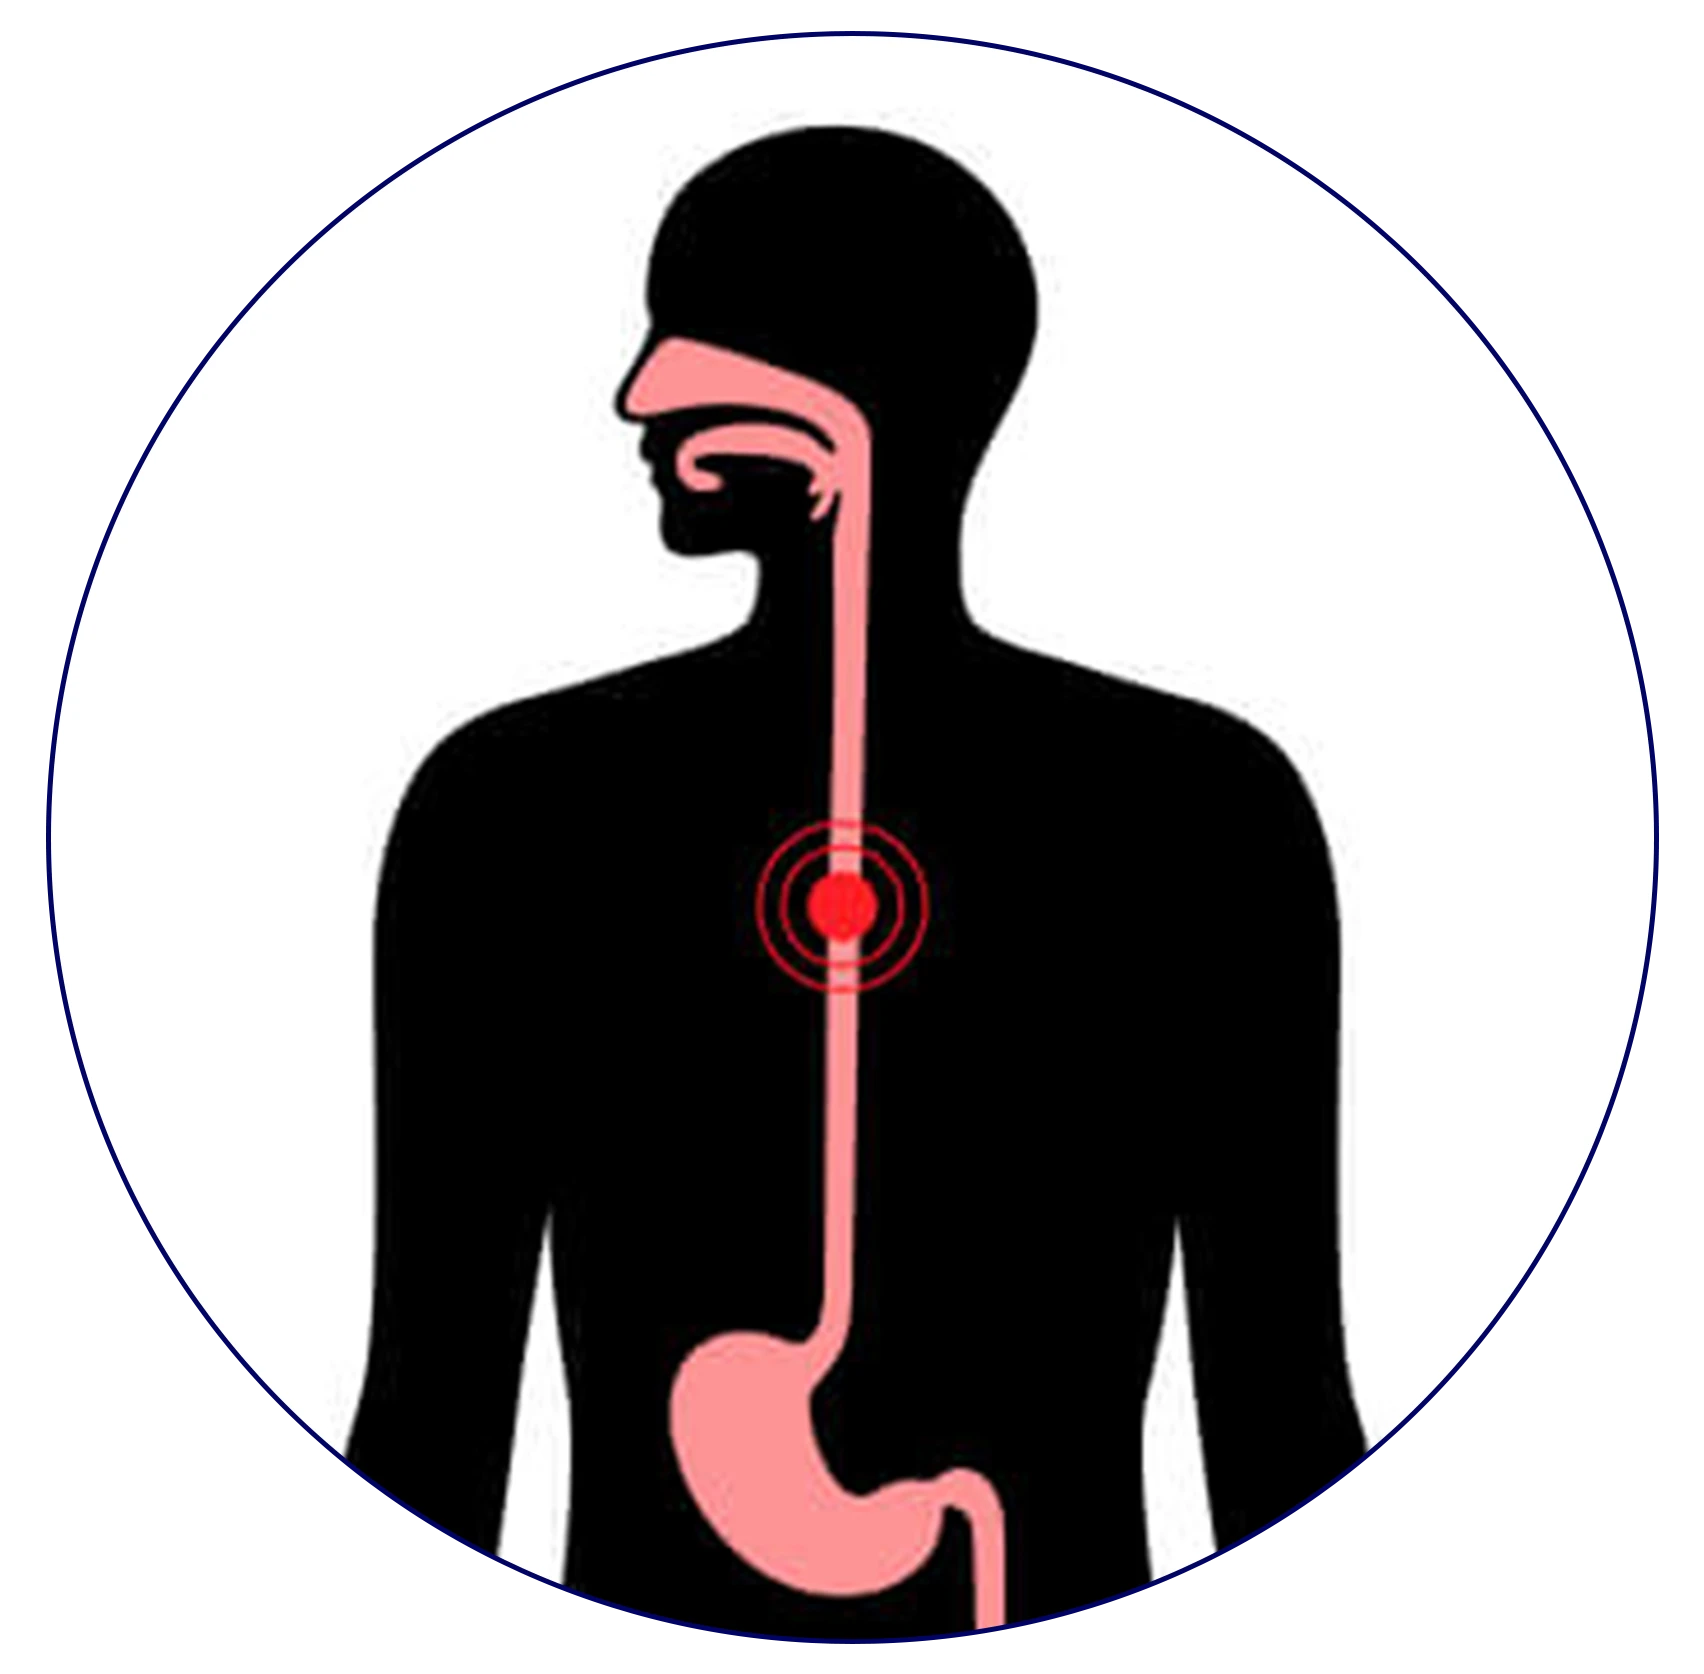 An endoscopic image revealing esophageal cancer.